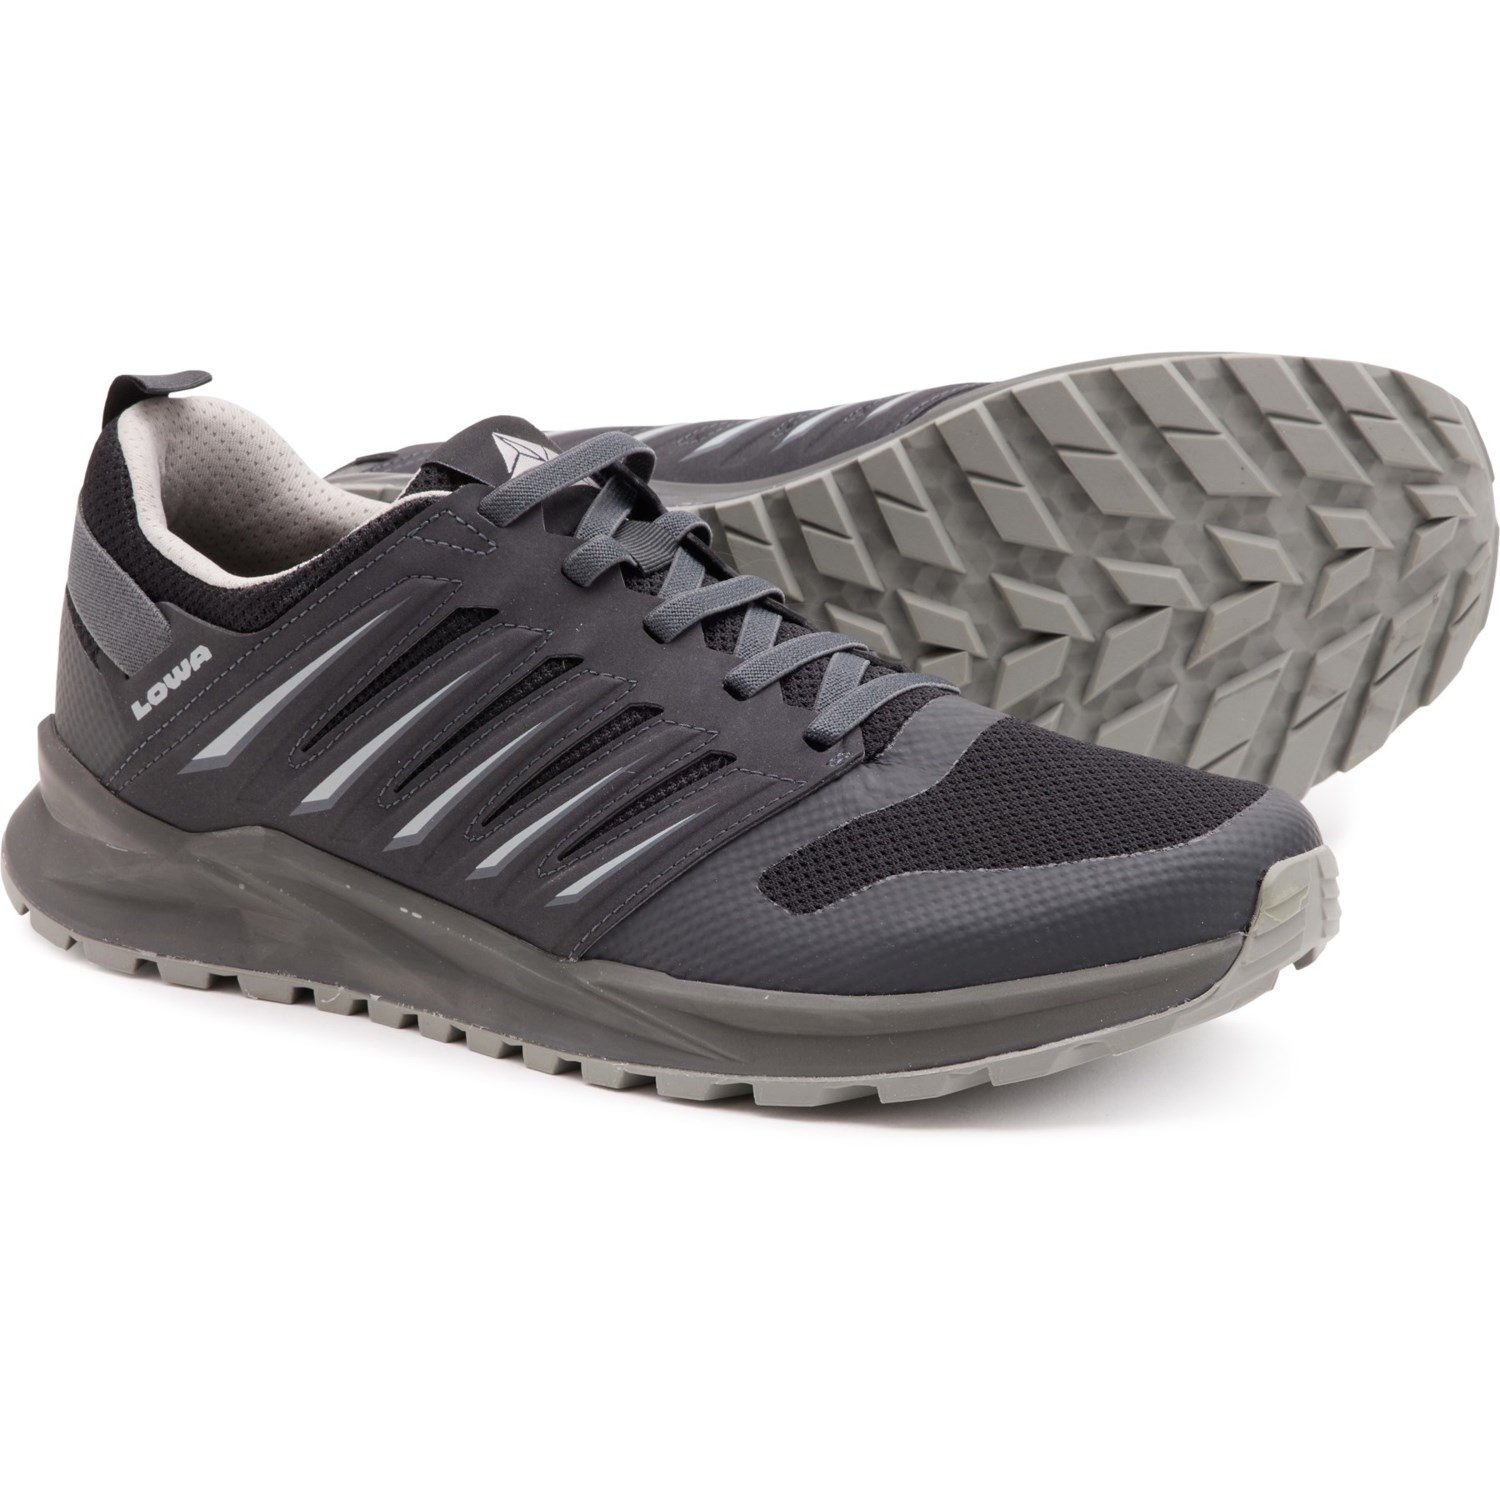 Lowa Vento Hiking Shoes (For Men) - Save 39%